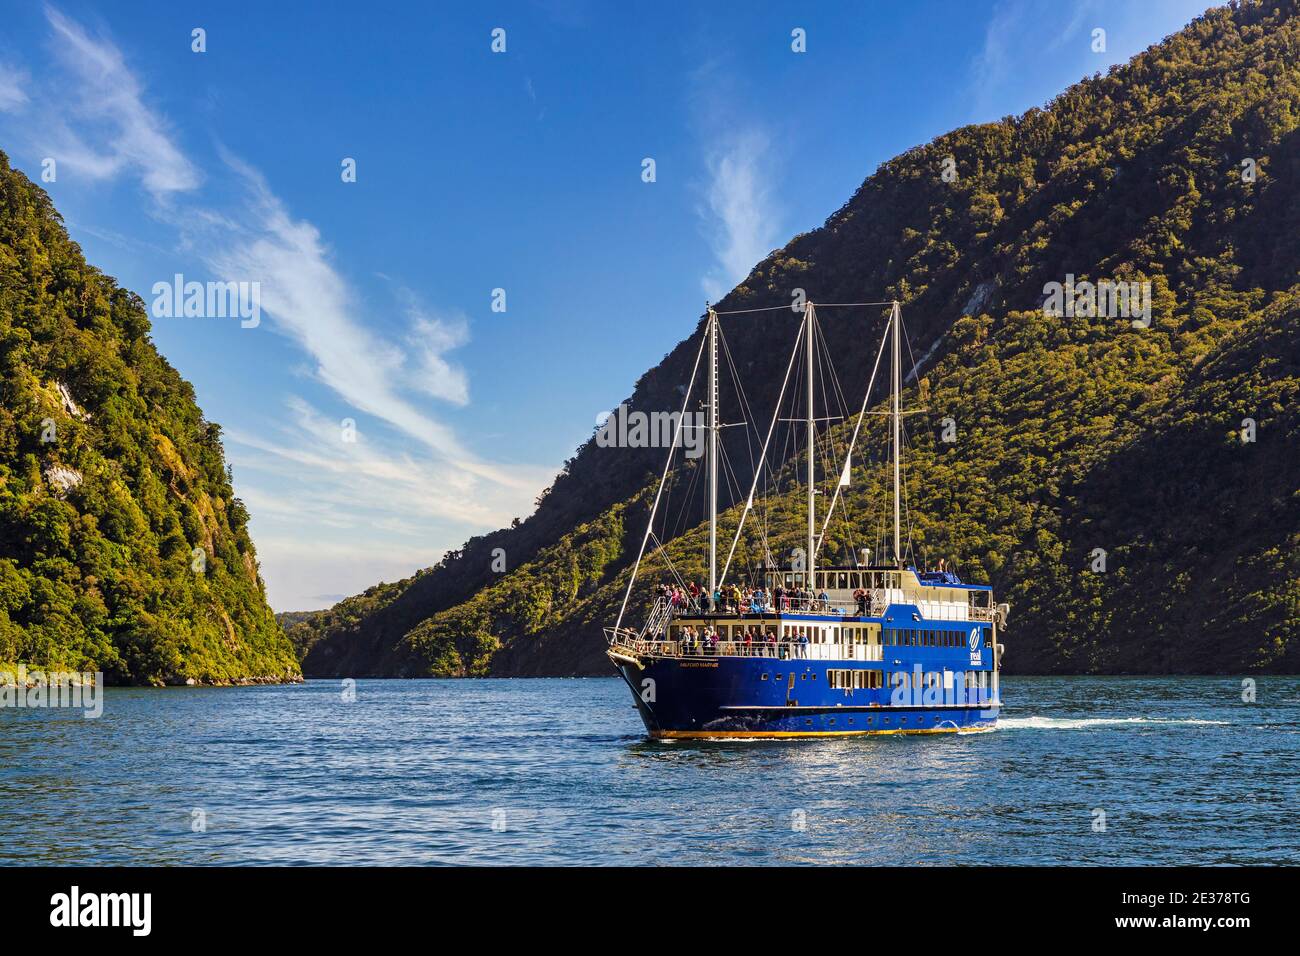 Milford Sound, or Piopiotahi, part of the fiords of the Southwest coastline on the South Island of New Zealand. The Milford Mariner with tourists. Stock Photo